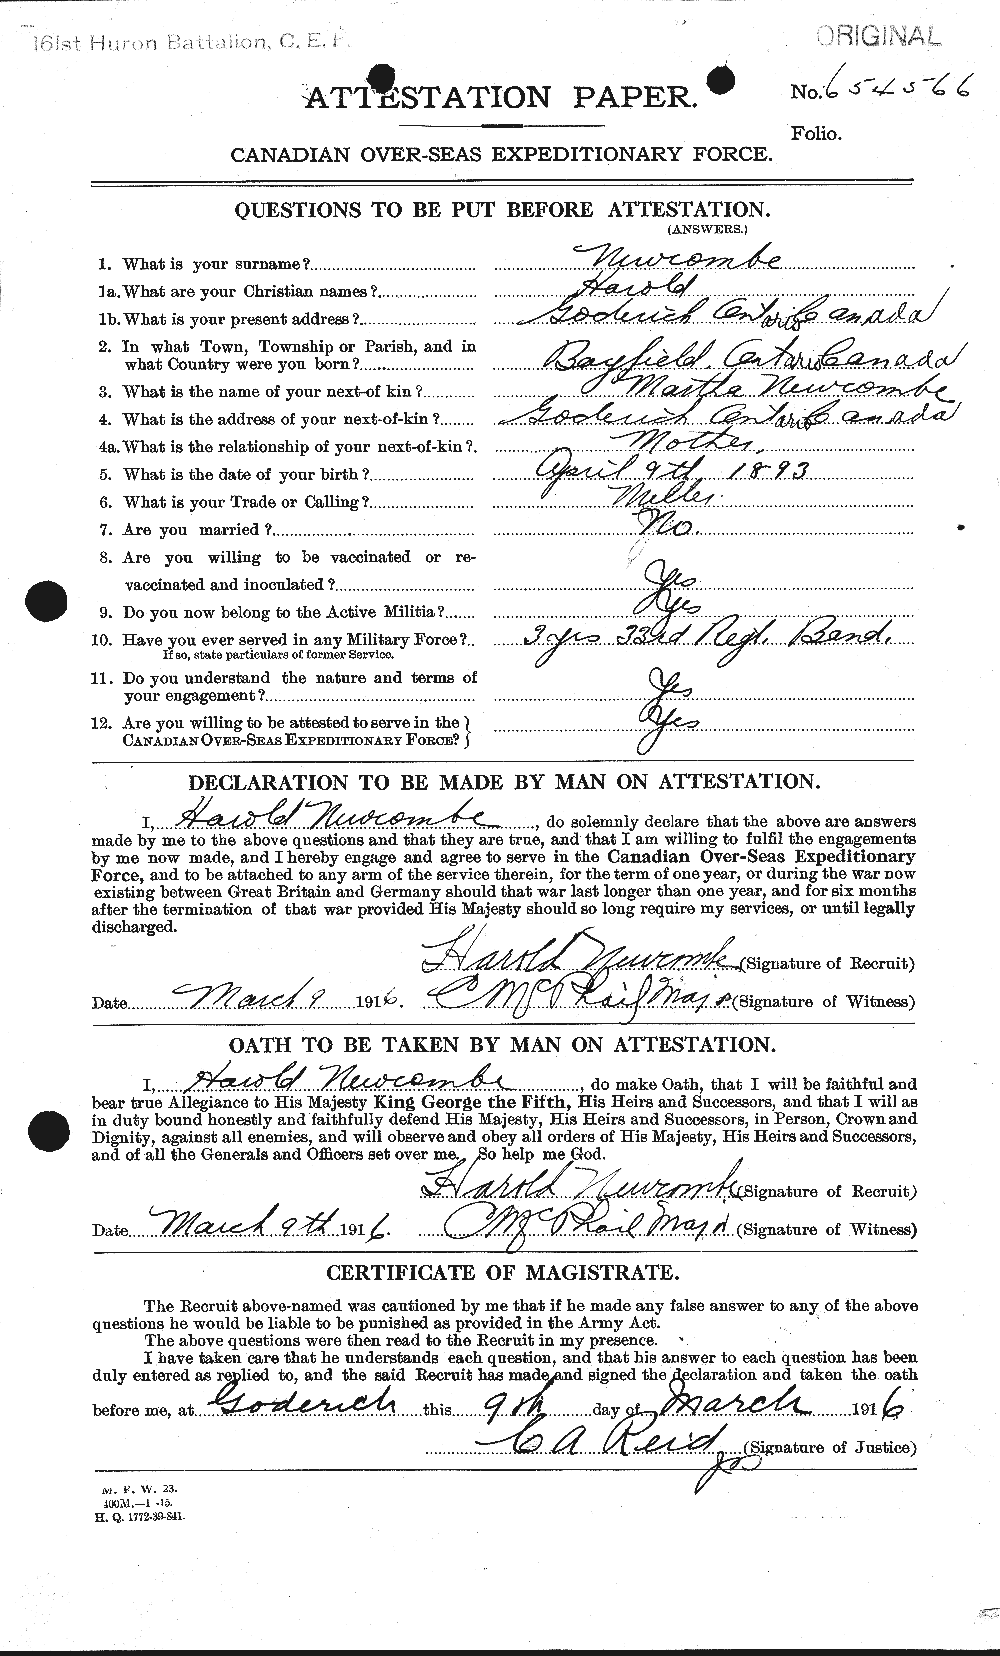 Personnel Records of the First World War - CEF 544191a